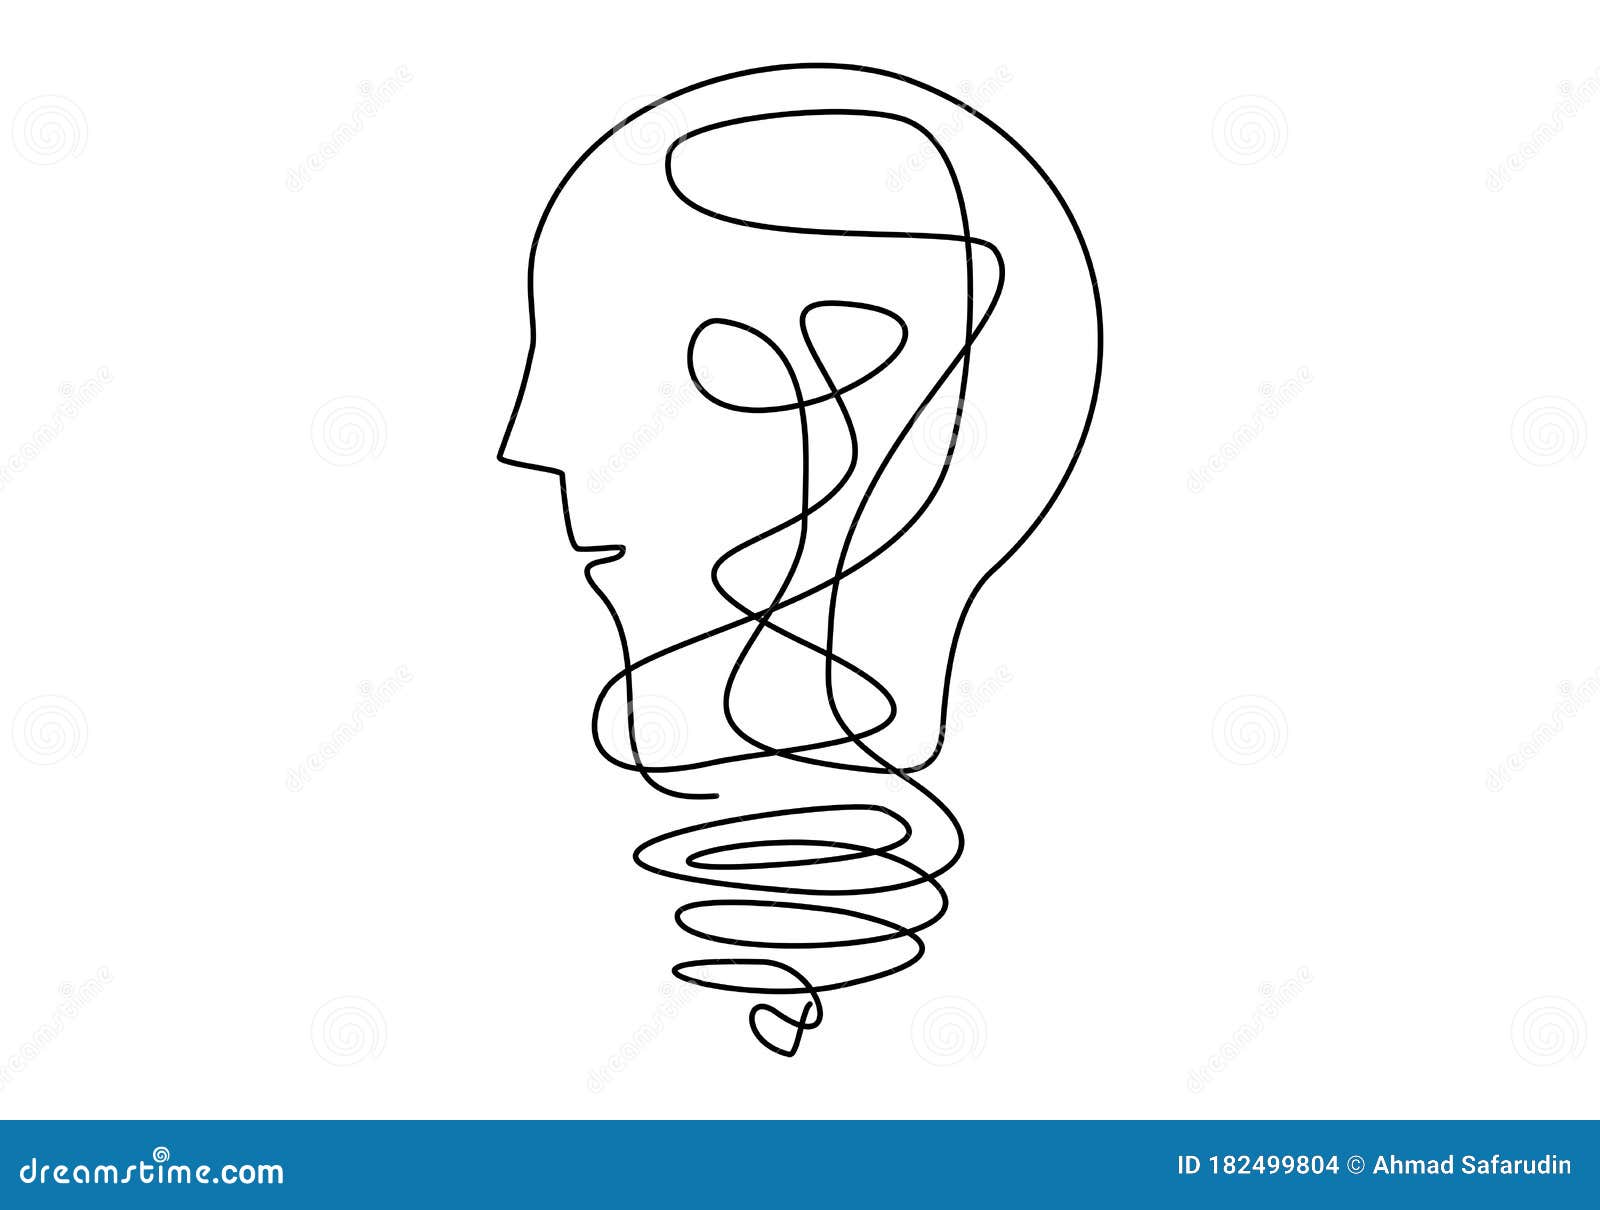 Continuous Line Art Or One Line Drawing Of A Human Brain. The Concept ...